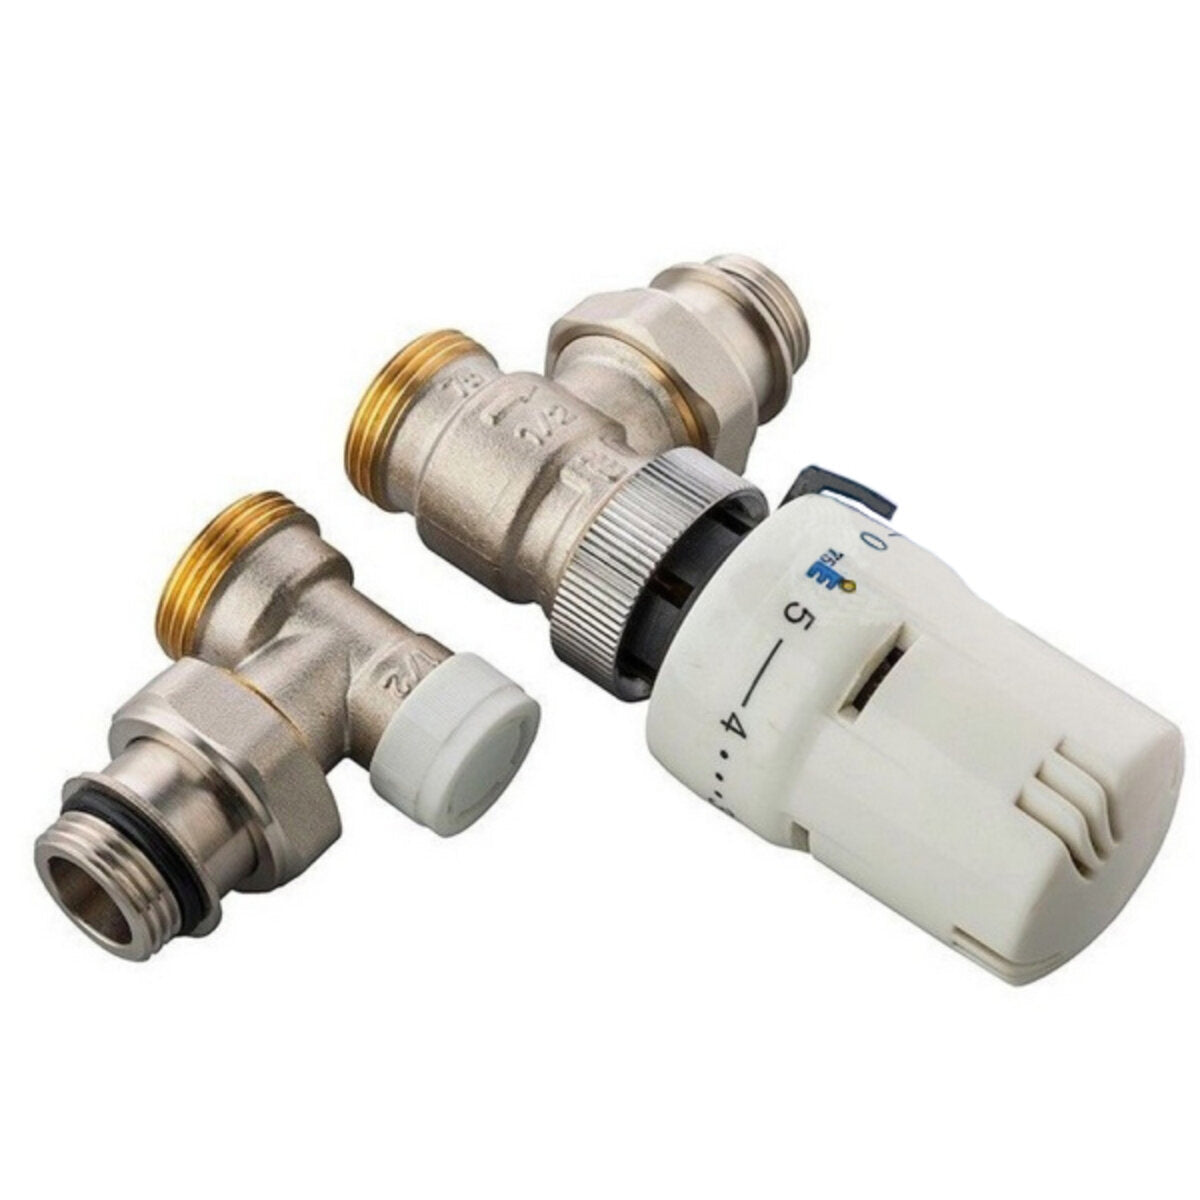 Ercos thermostatic kit with thermostatic valve and angle lockshield 1/2" m connections for radiators